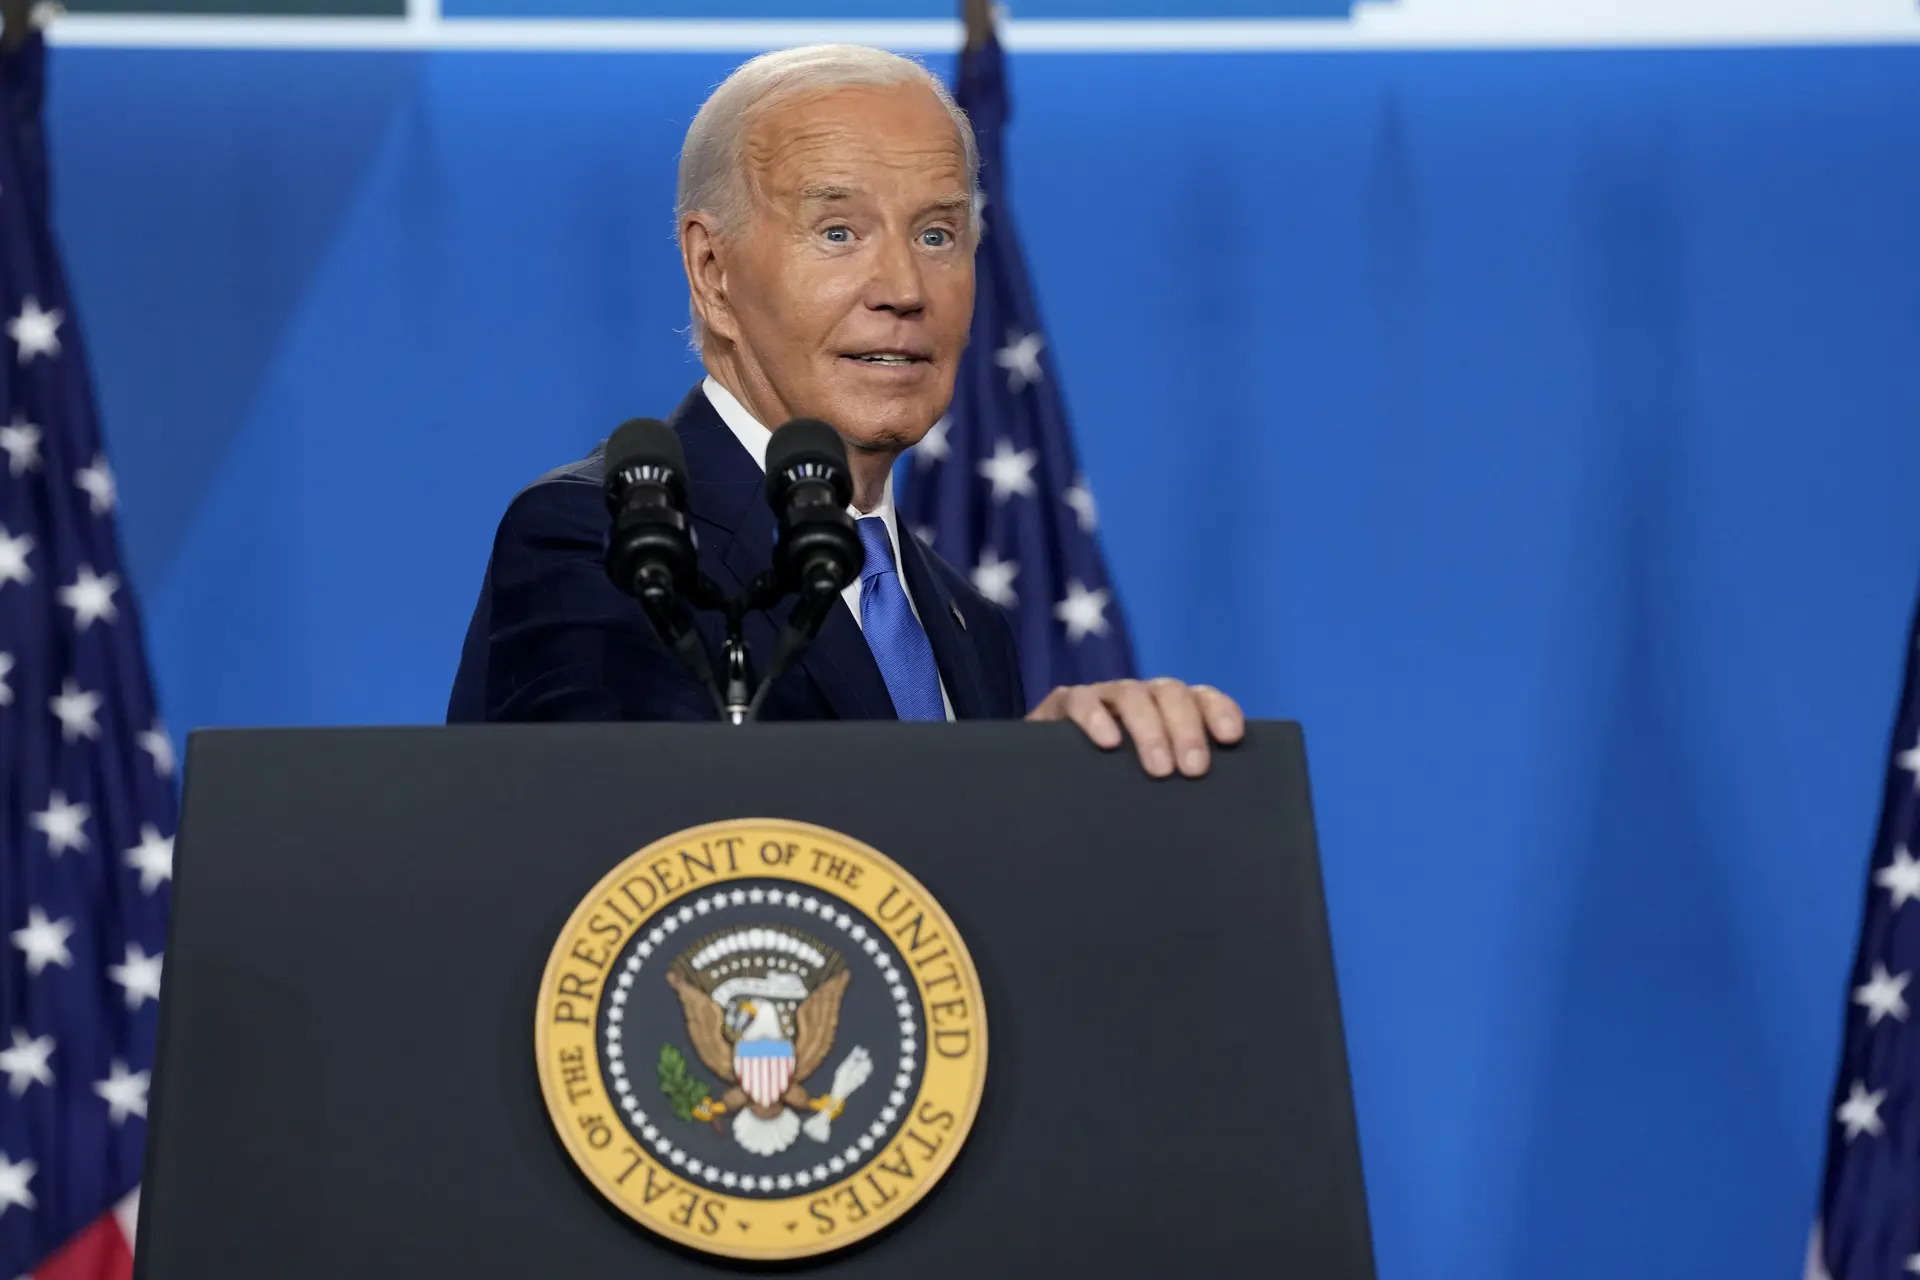 Biden's latest brutal gaffe at NATO Summit; is this the end of his Presidential candidature? 